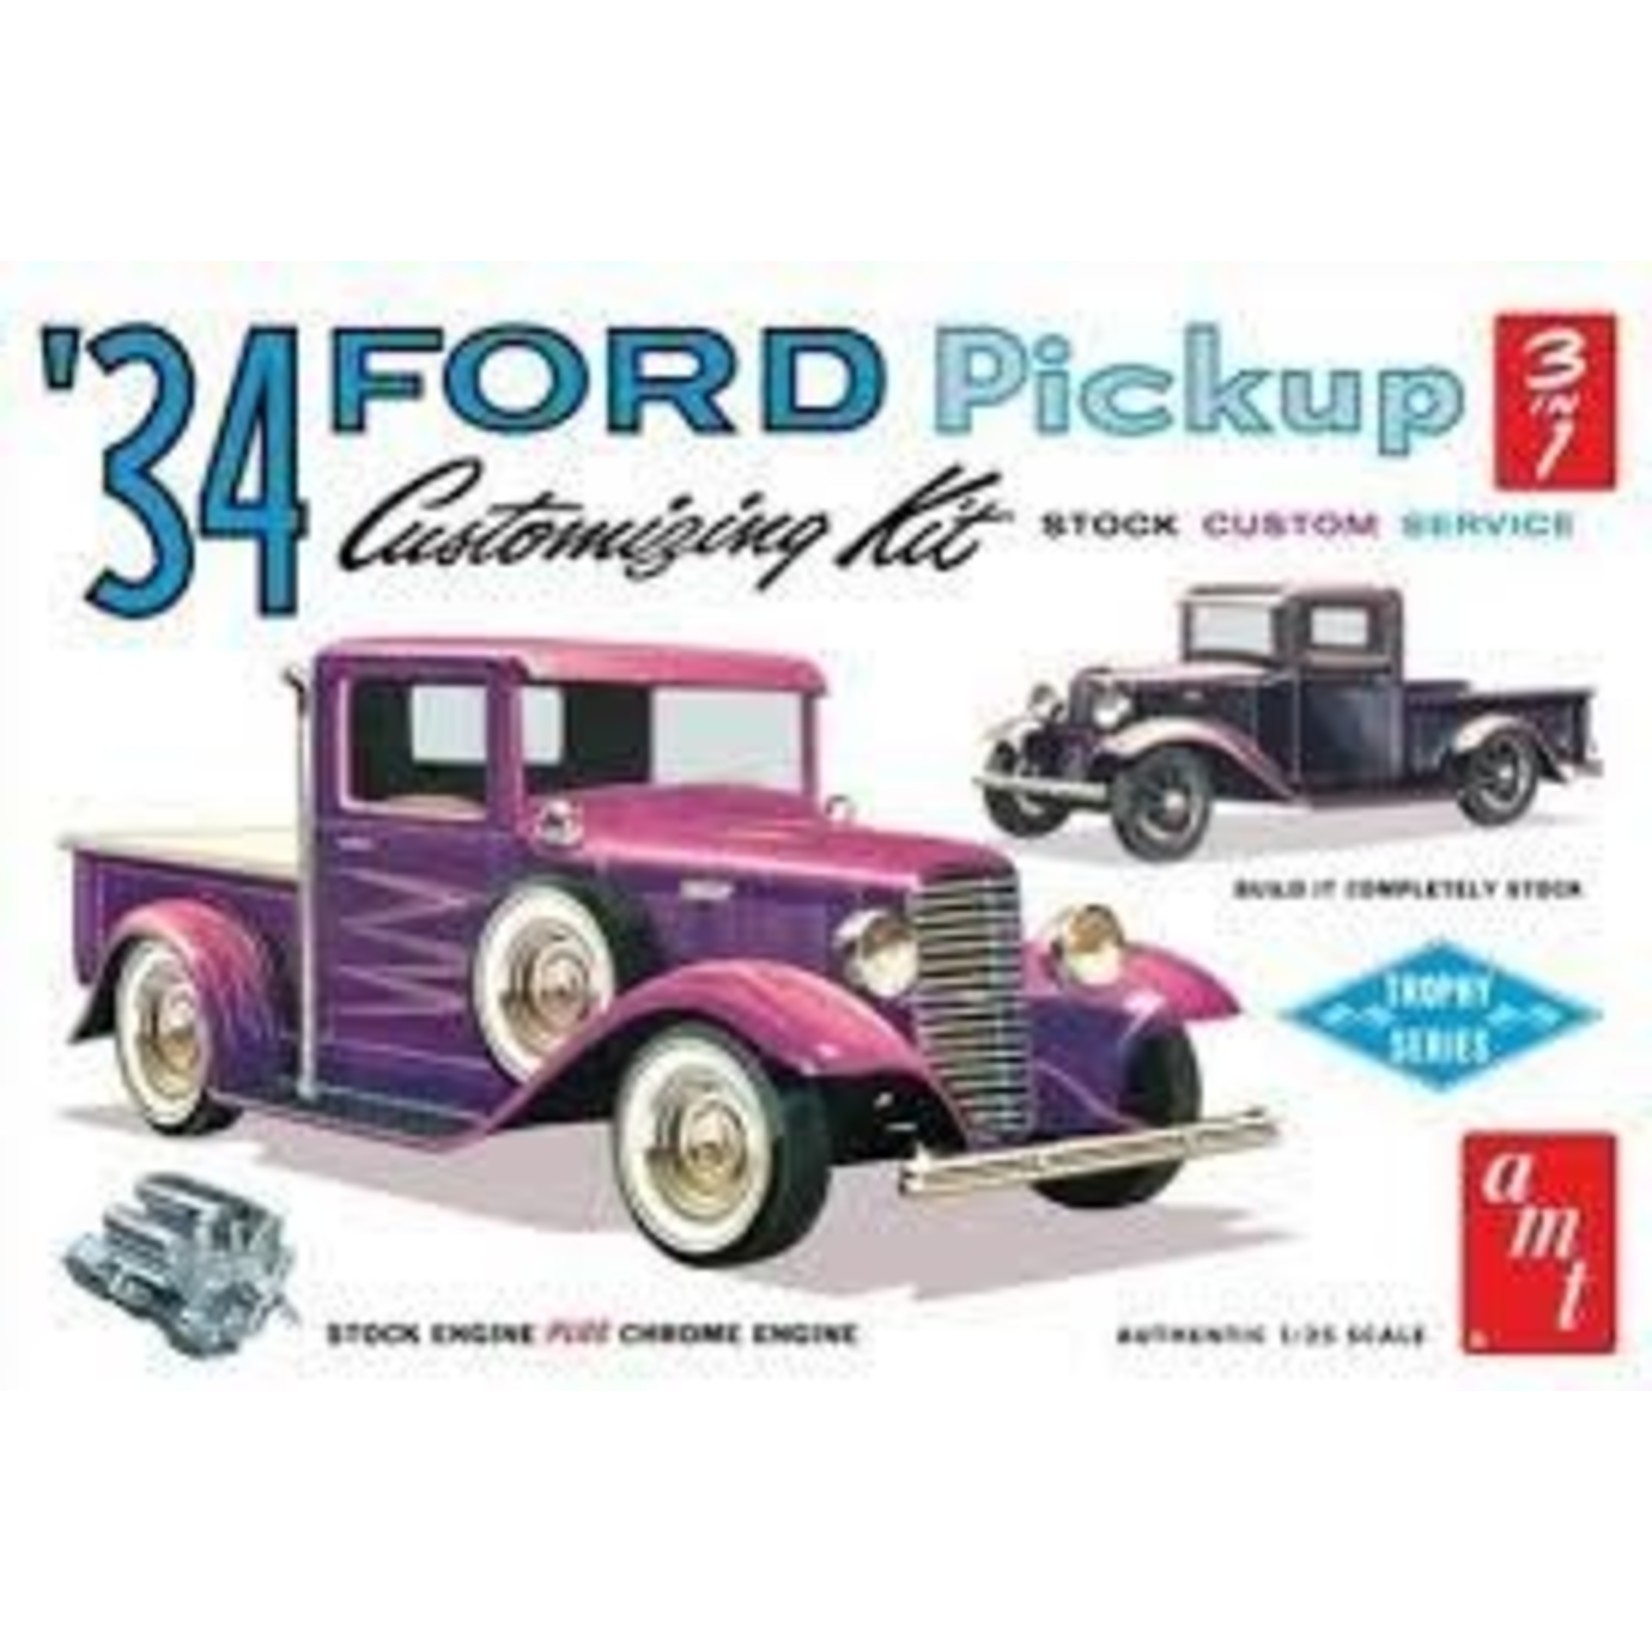 34 Ford pickup-AMT